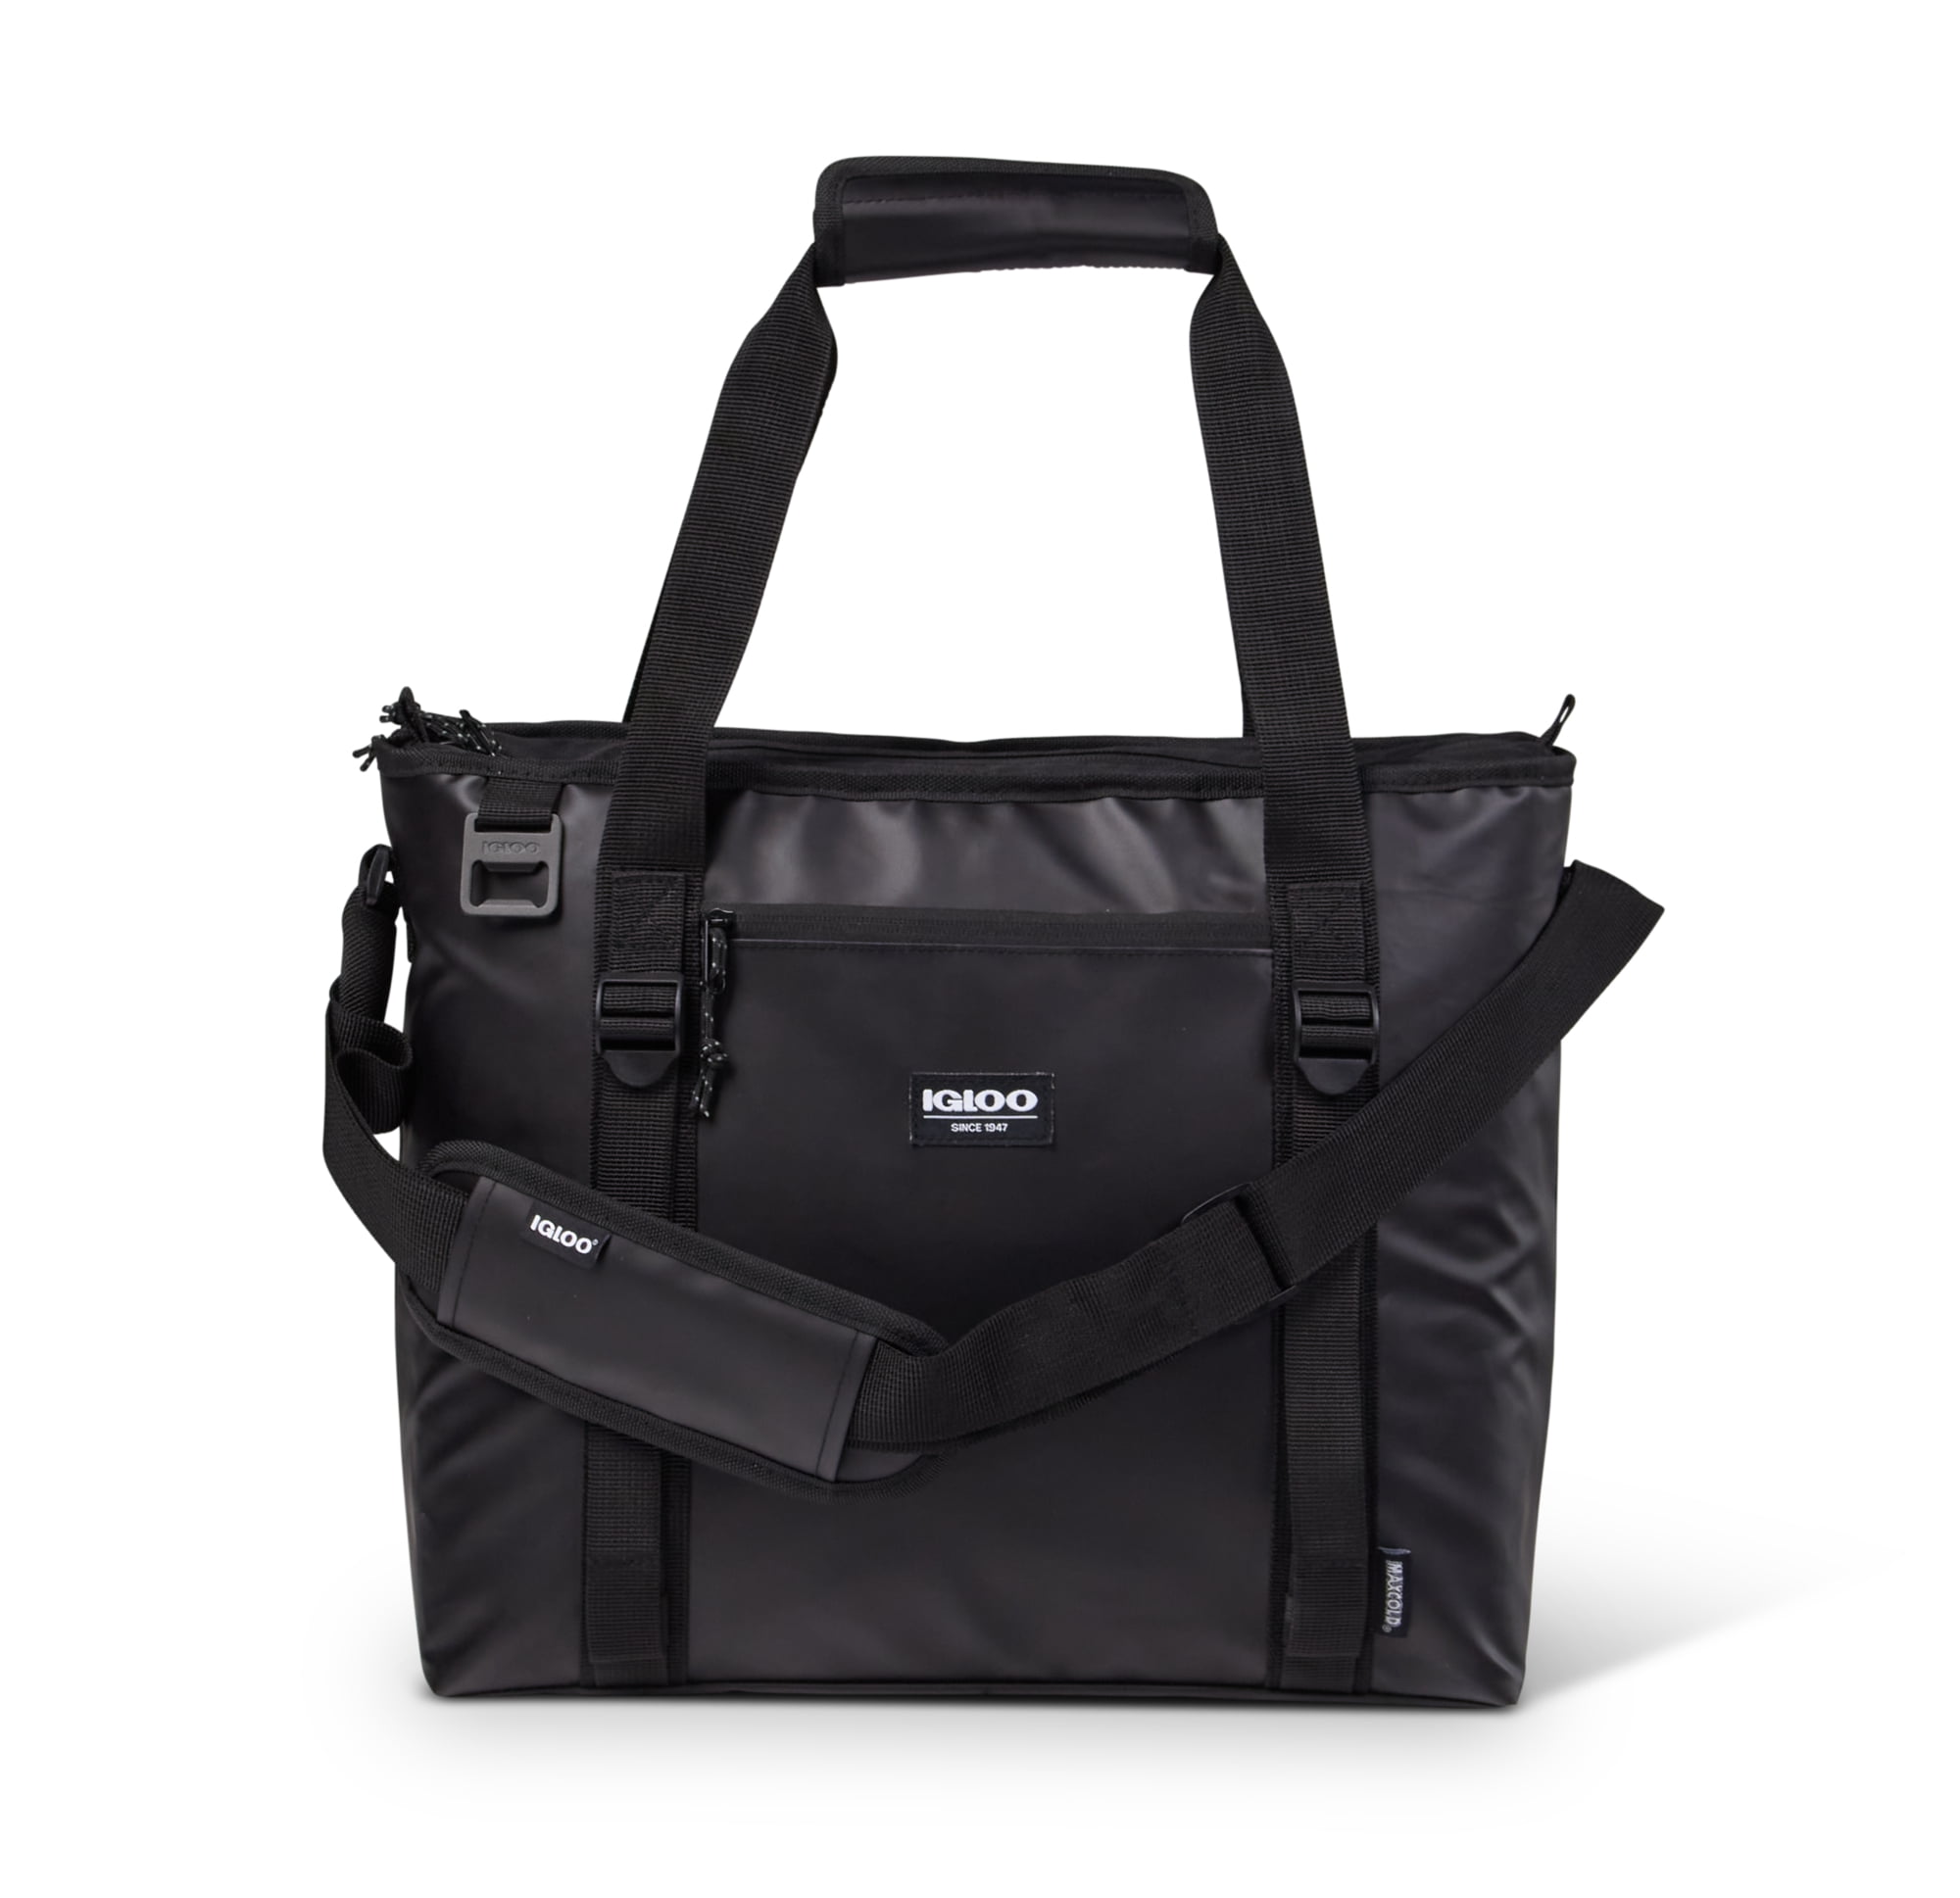 Gray/Black Igloo MaxCold 16-Can Tote Cooler 